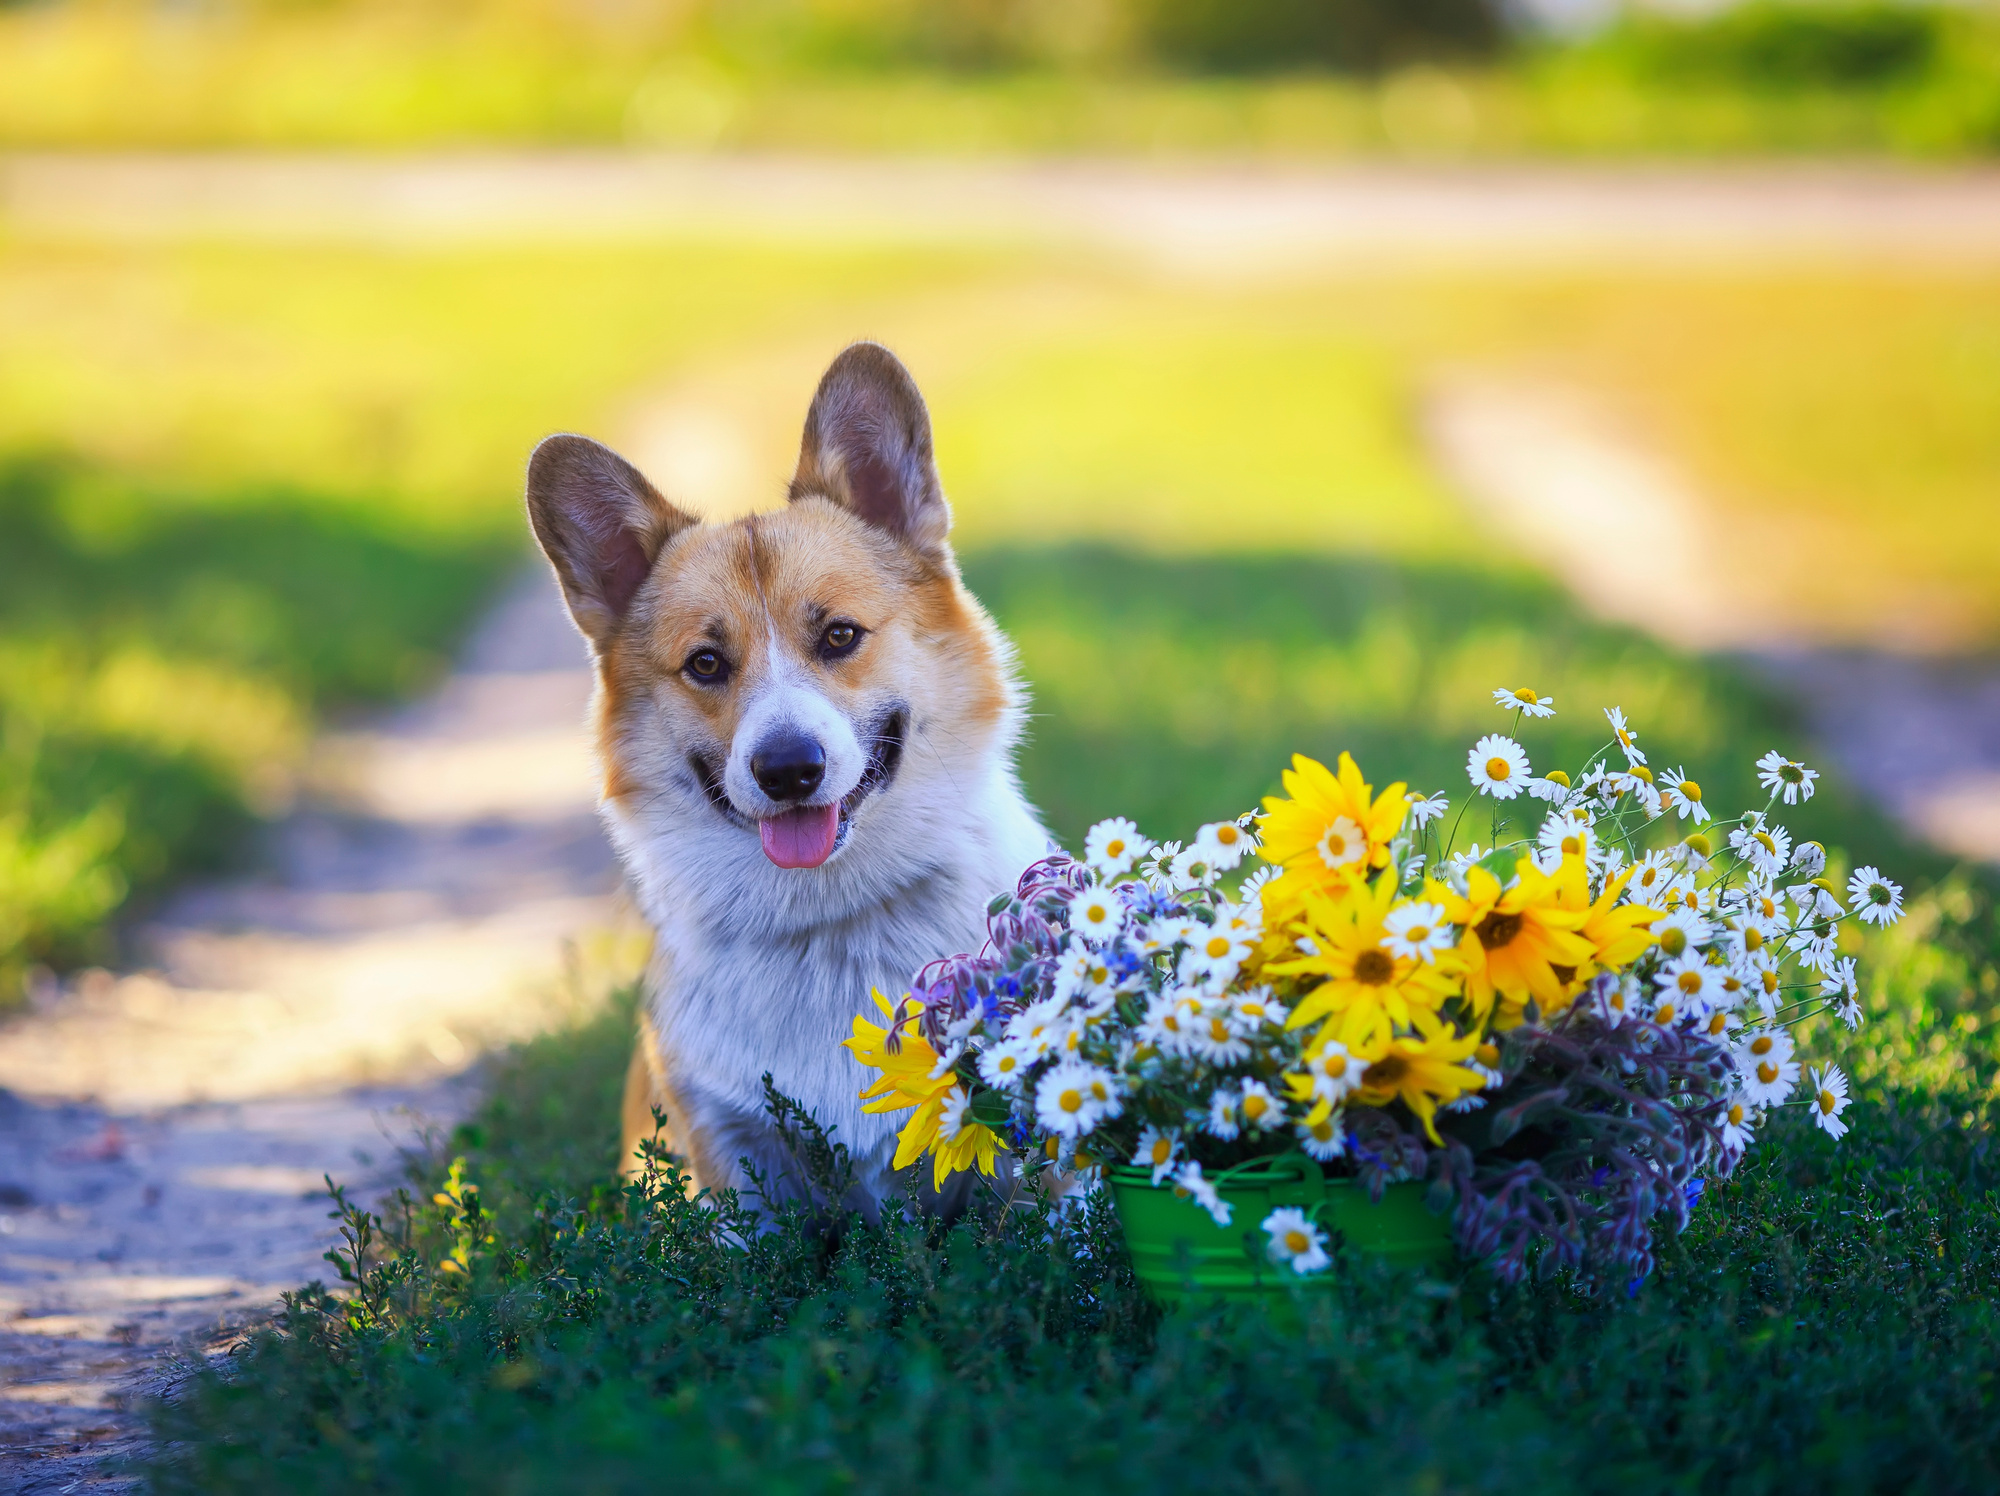 cute puppy dog red Corgi sitting in the garden next to a bouquet of field and garden flowers on a Sunny holiday